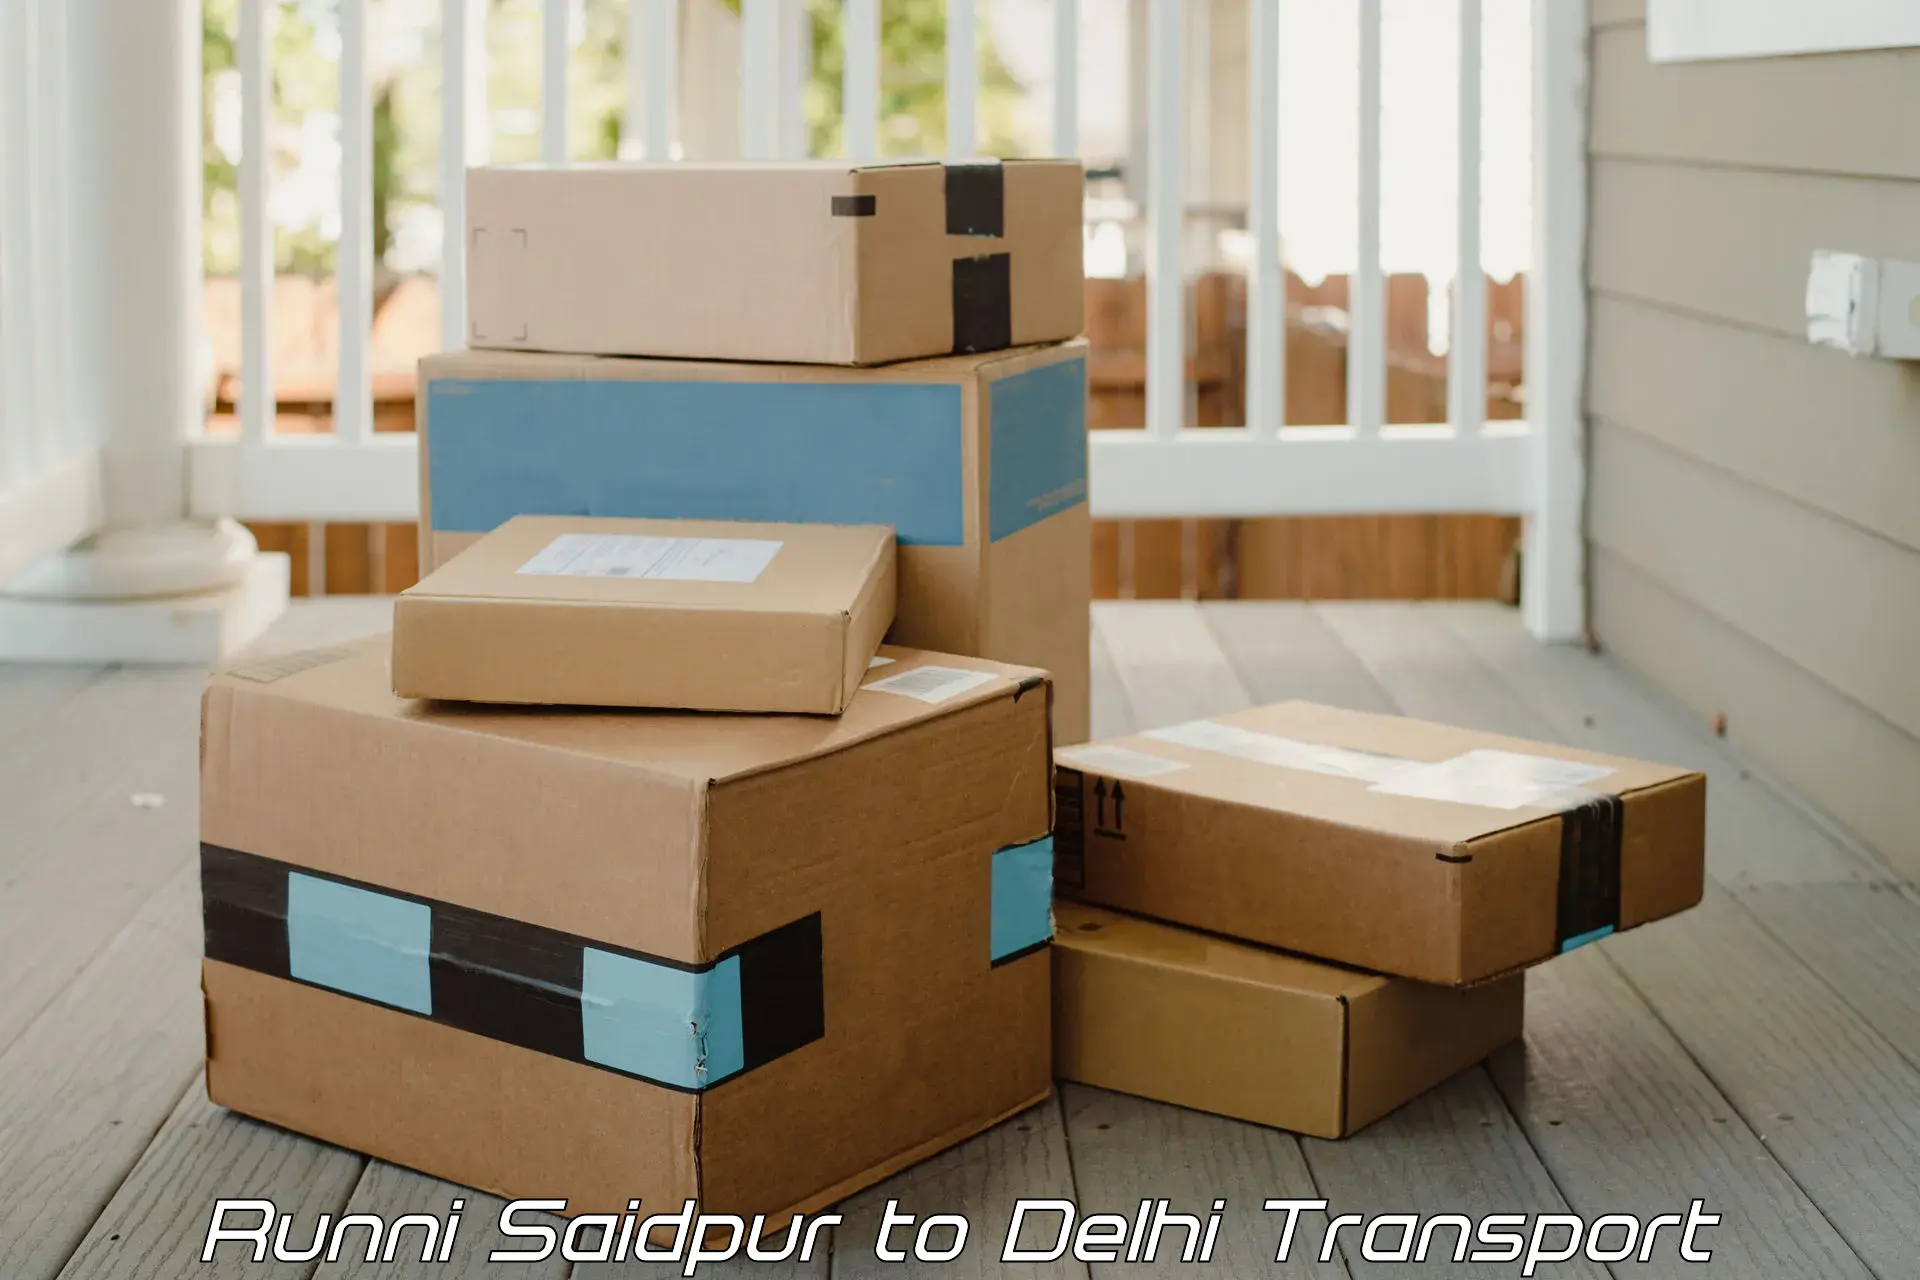 Nationwide transport services Runni Saidpur to Indraprastha